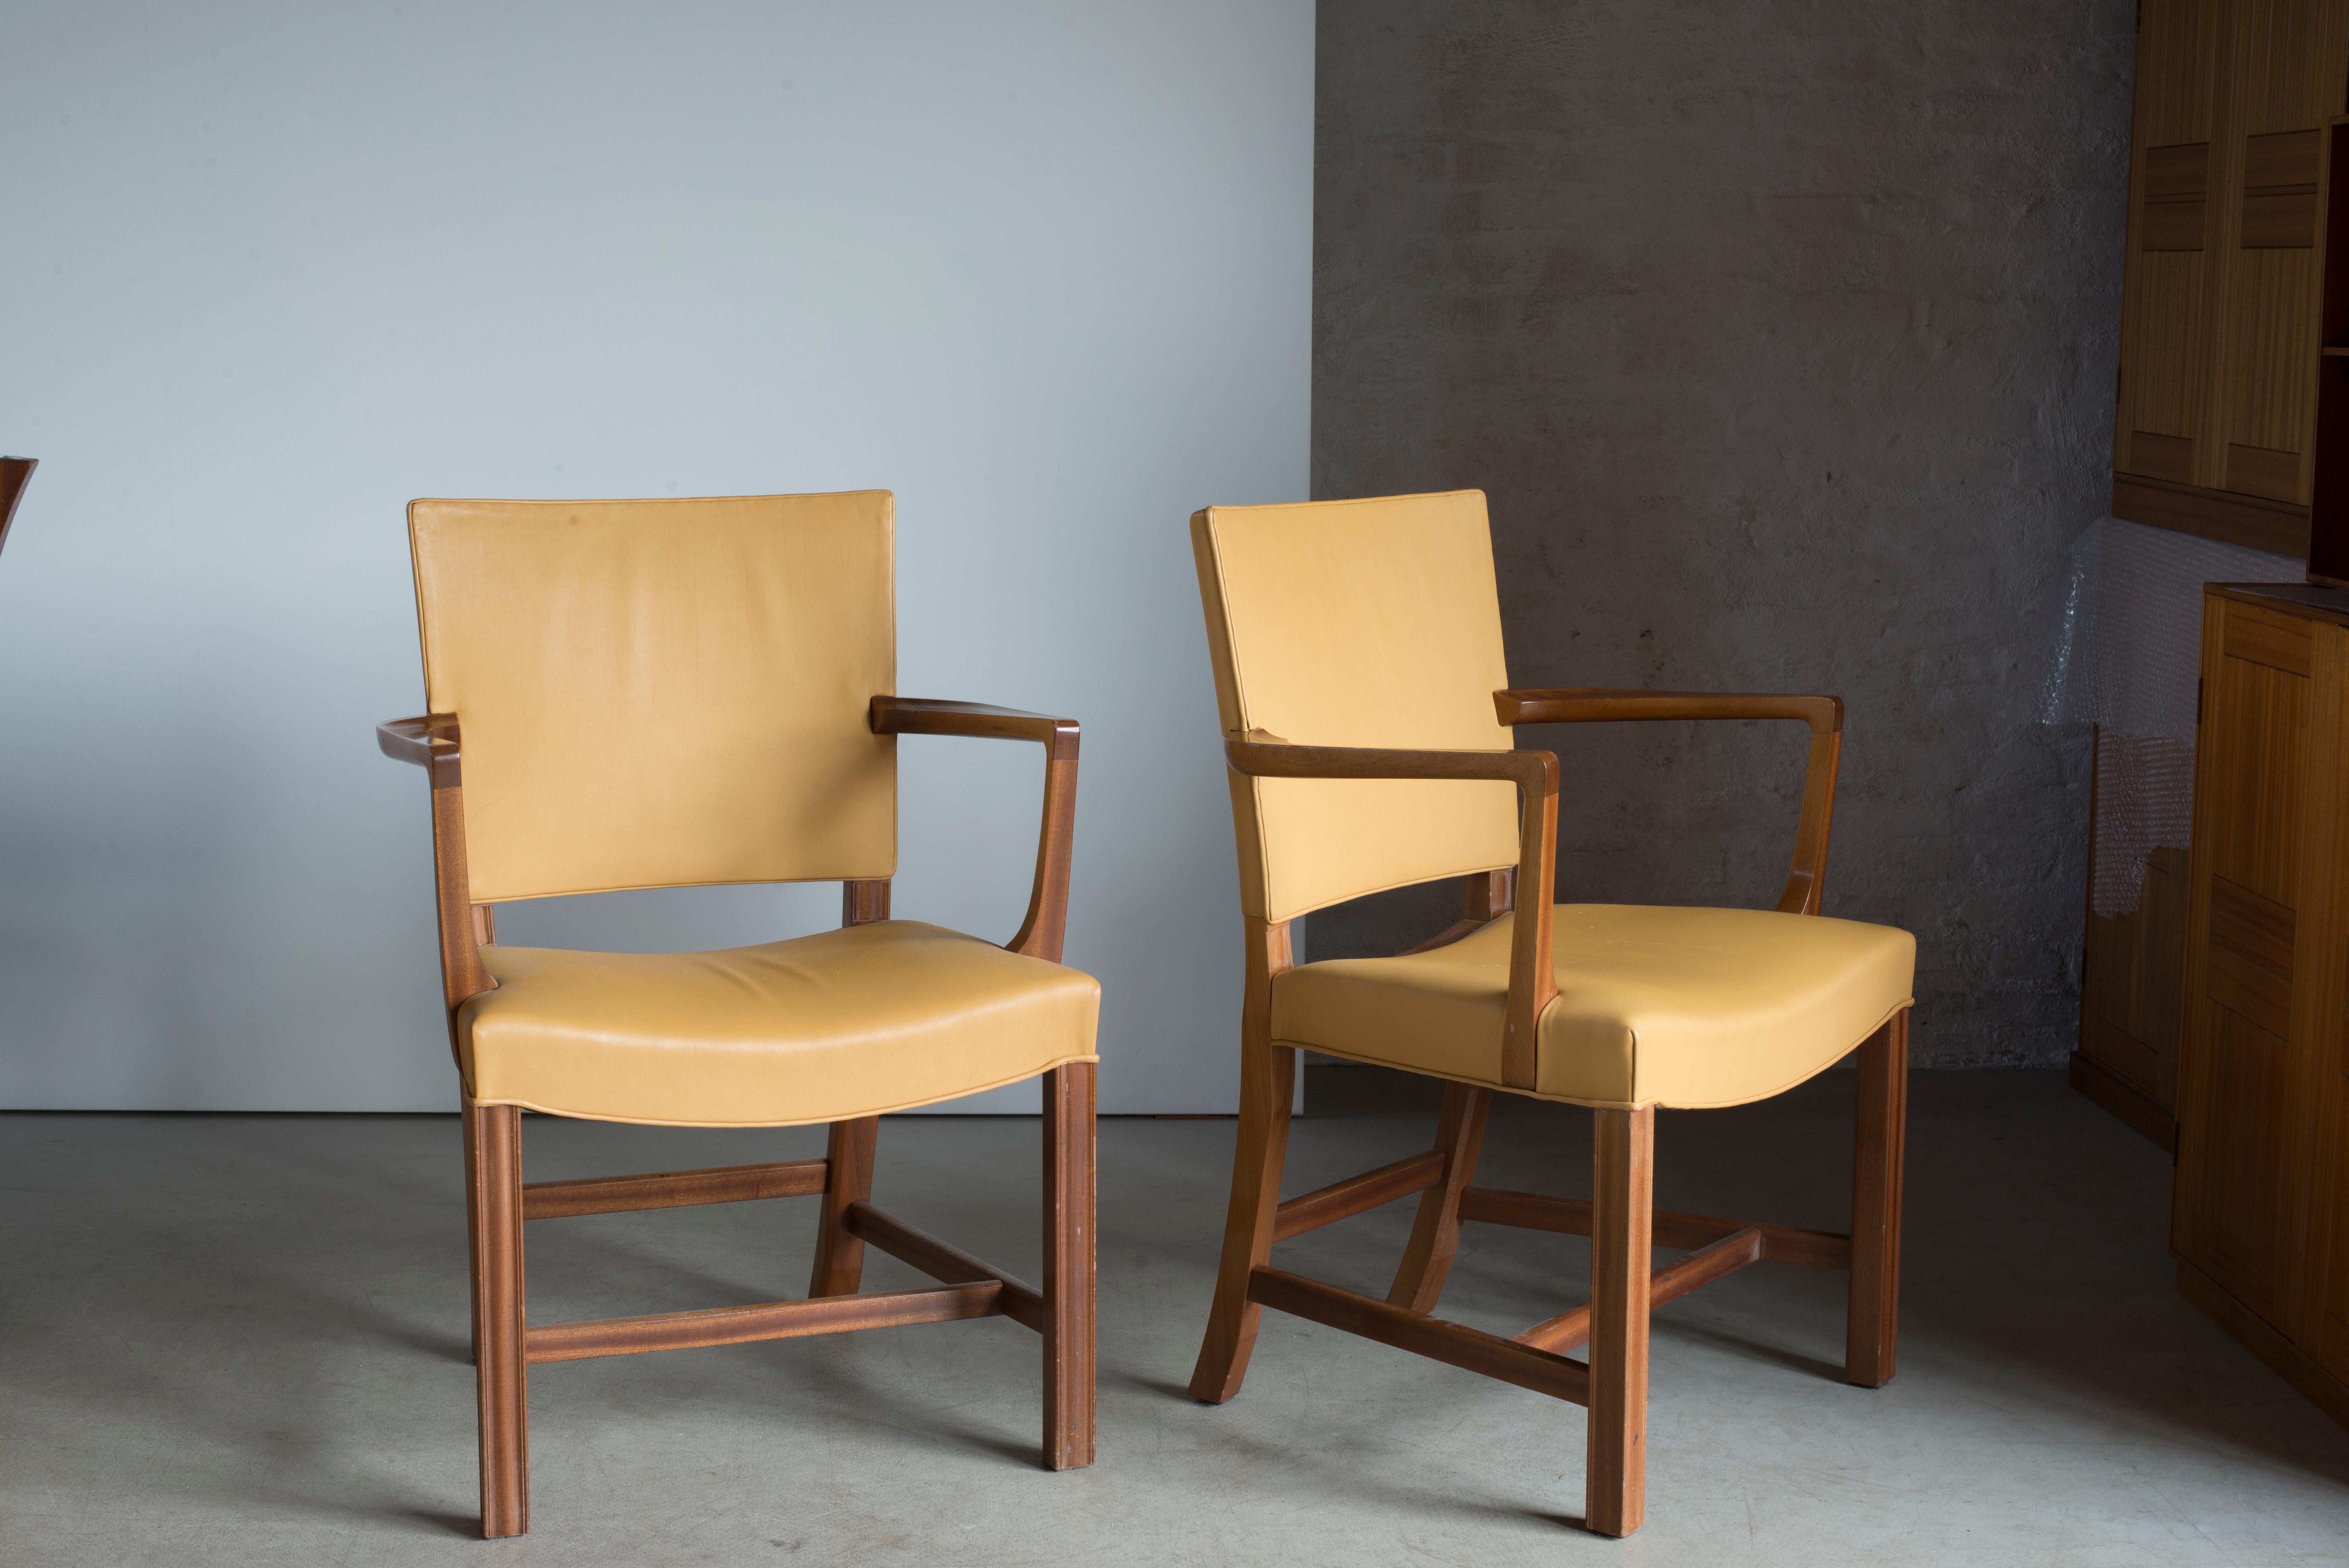 Pair of Kaare Klint armchairs in mahogany and leather. Executed by Rud. Rasmussen.